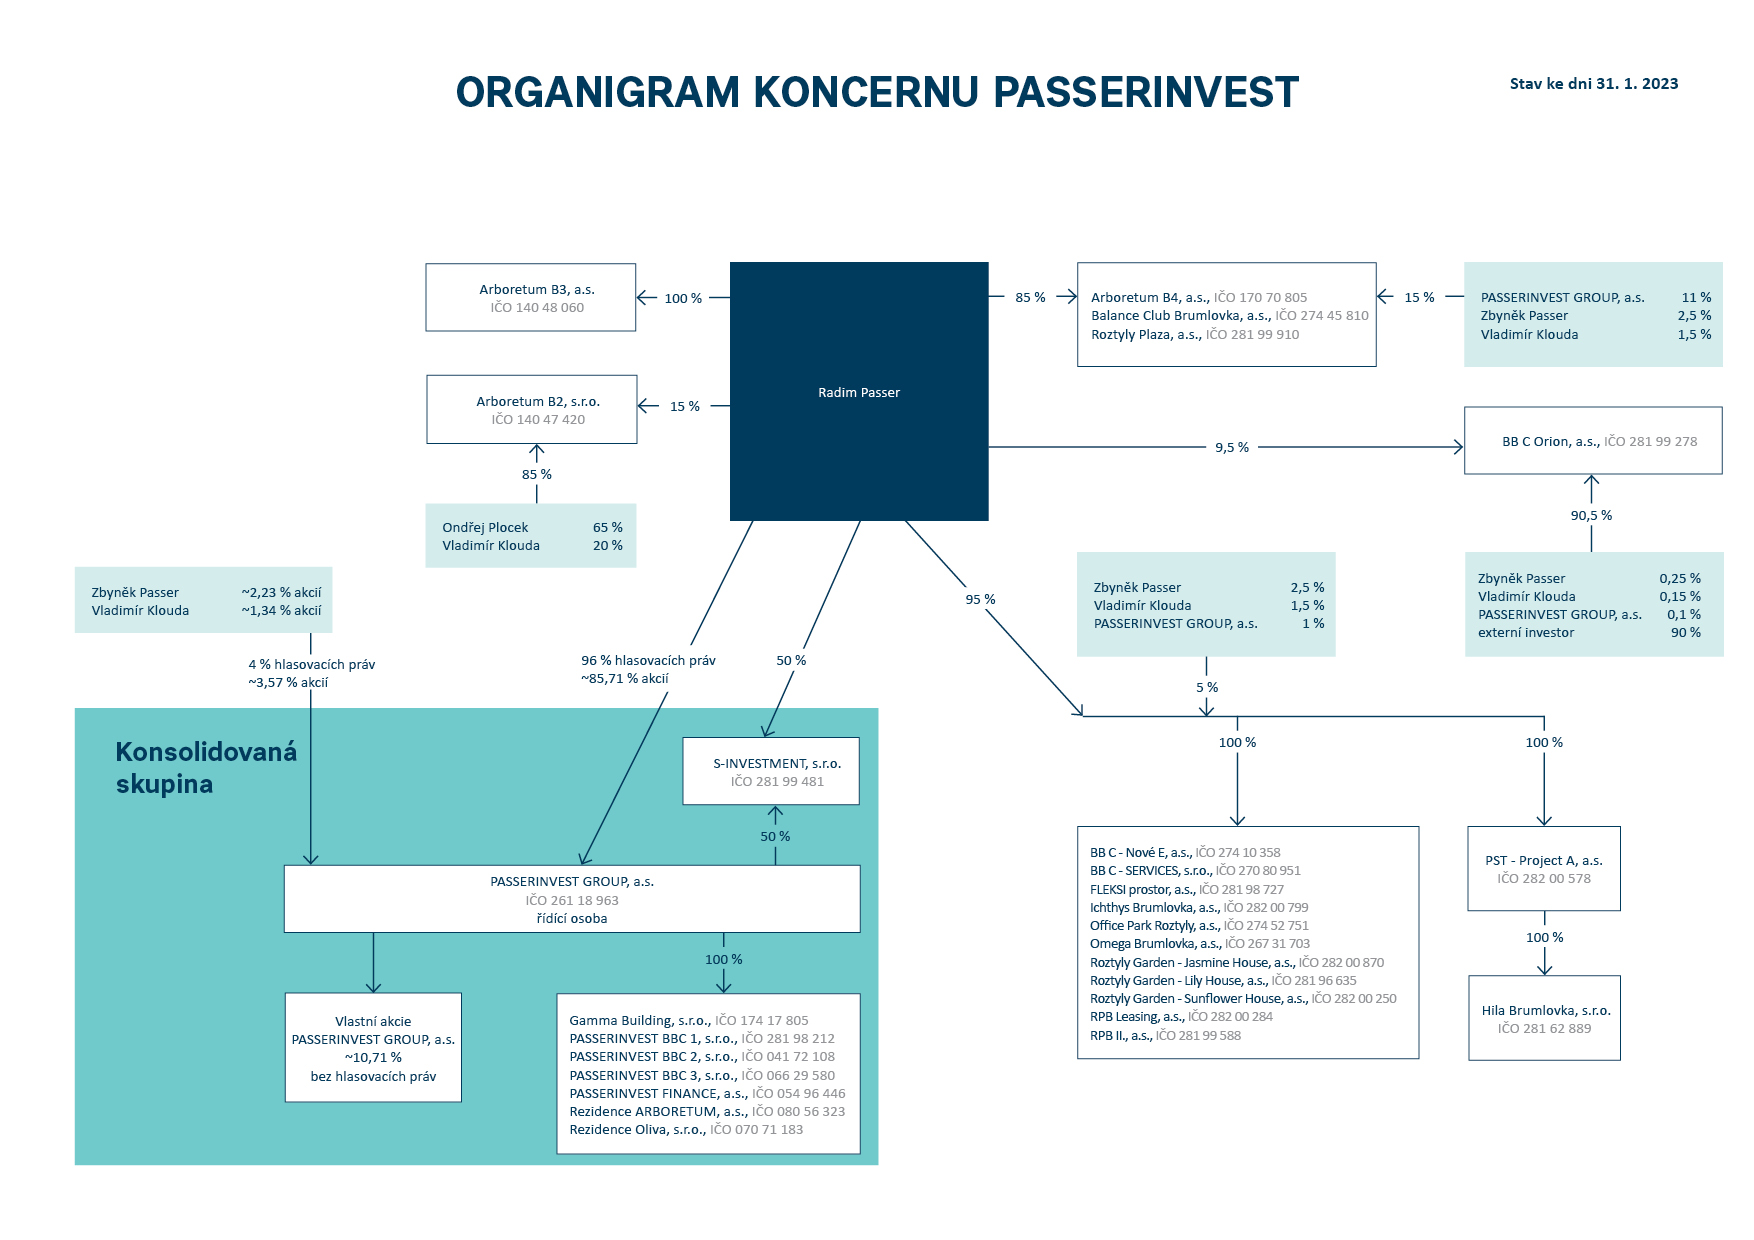 Organization chart of the Passerinvest concern